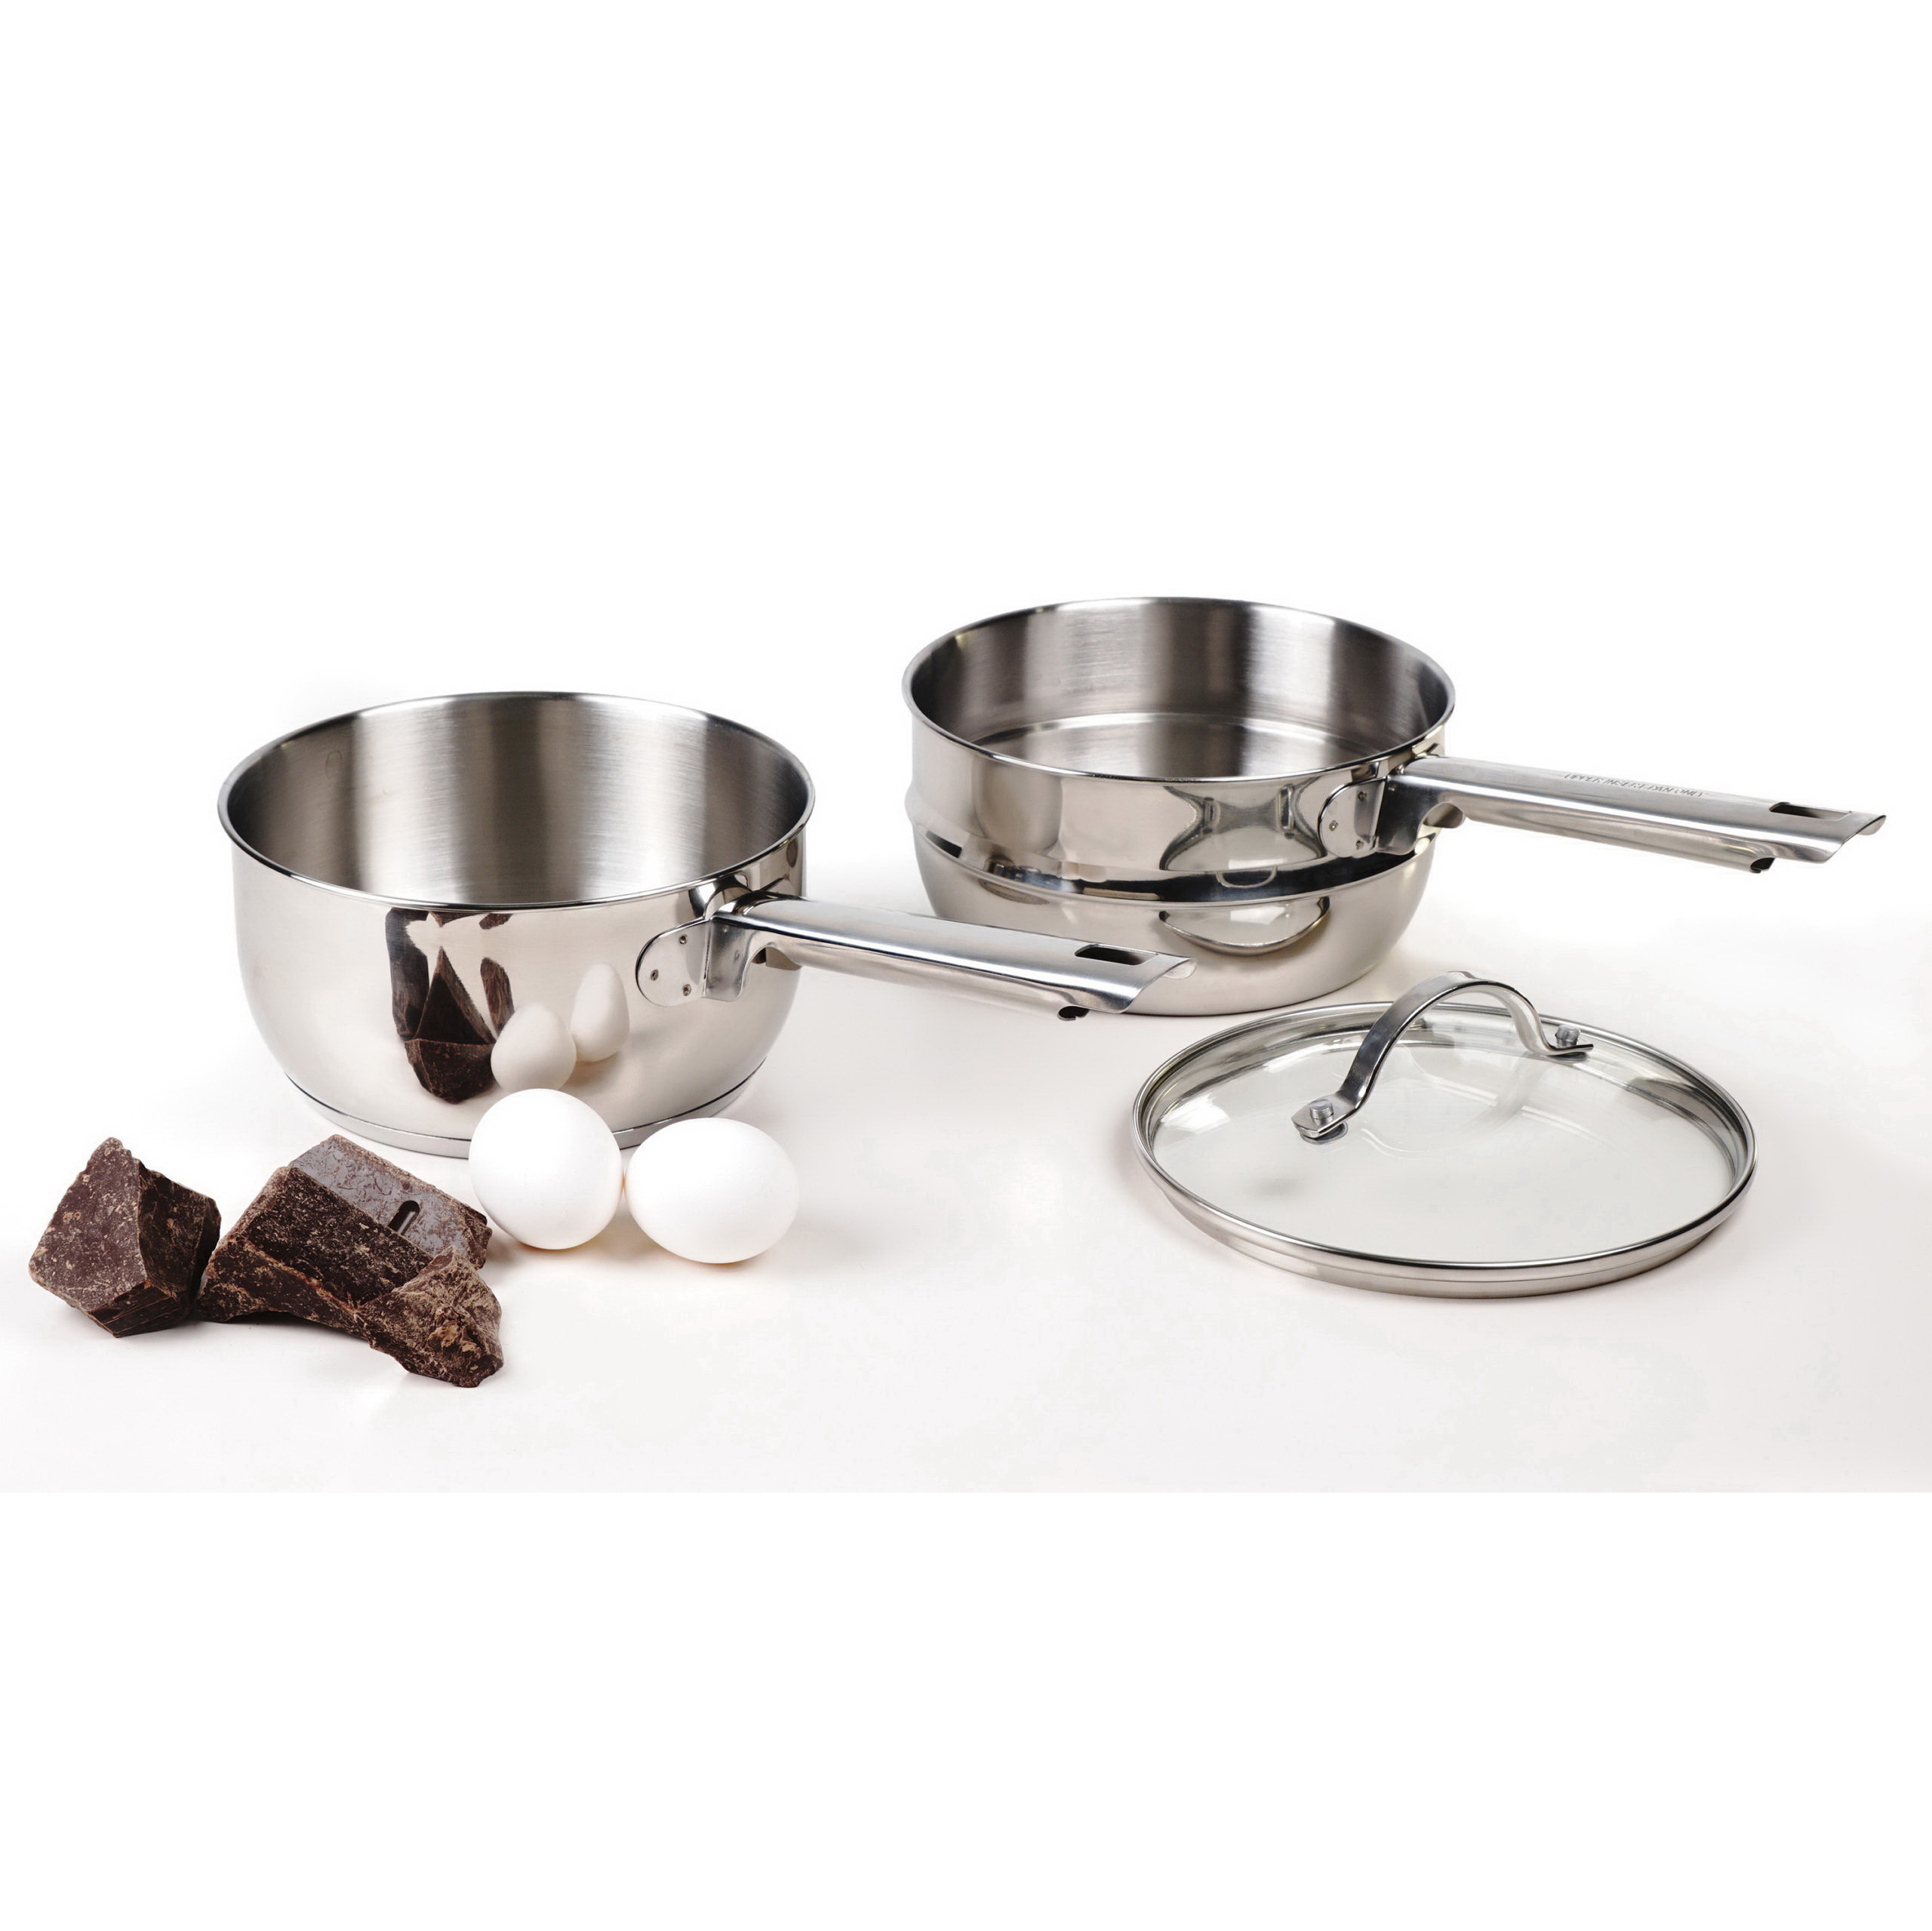 Endurance TDB-2 Induction Double Boiler, 2 qt, 6 in H Boiler, Stainless Steel - 2